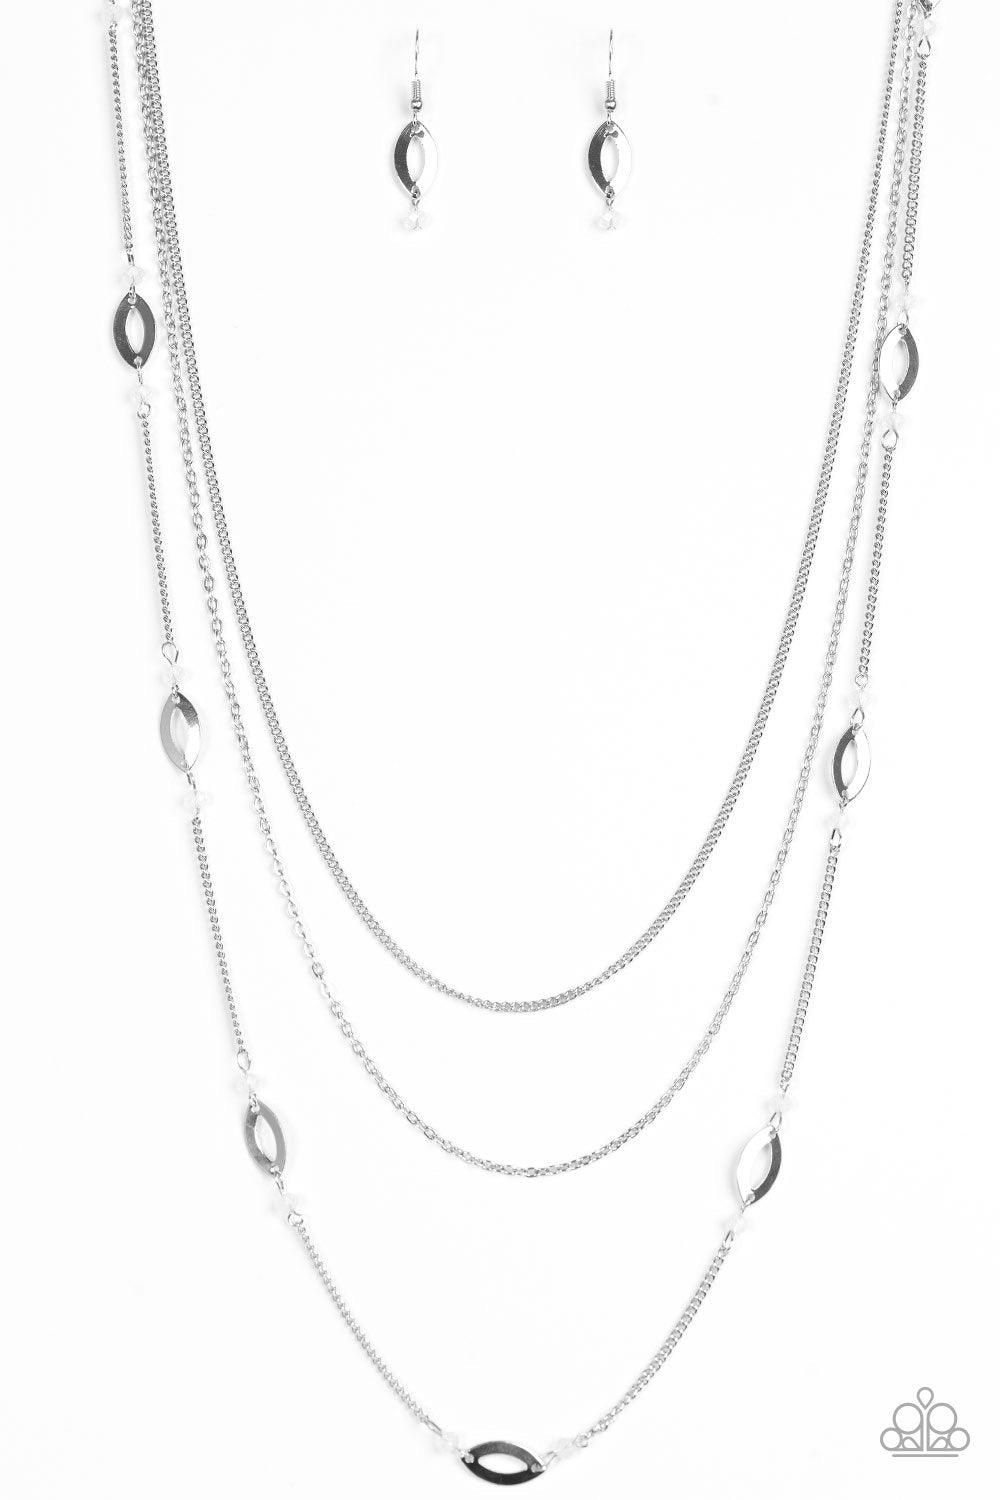 Paparazzi Accessories Afternoon Glow - White Mismatched silver chains layer down the chest. Sections of shimmery silver marquises frame and glowing white beads trickle along the centermost chain for a seasonal finish. Features an adjustable clasp closure.